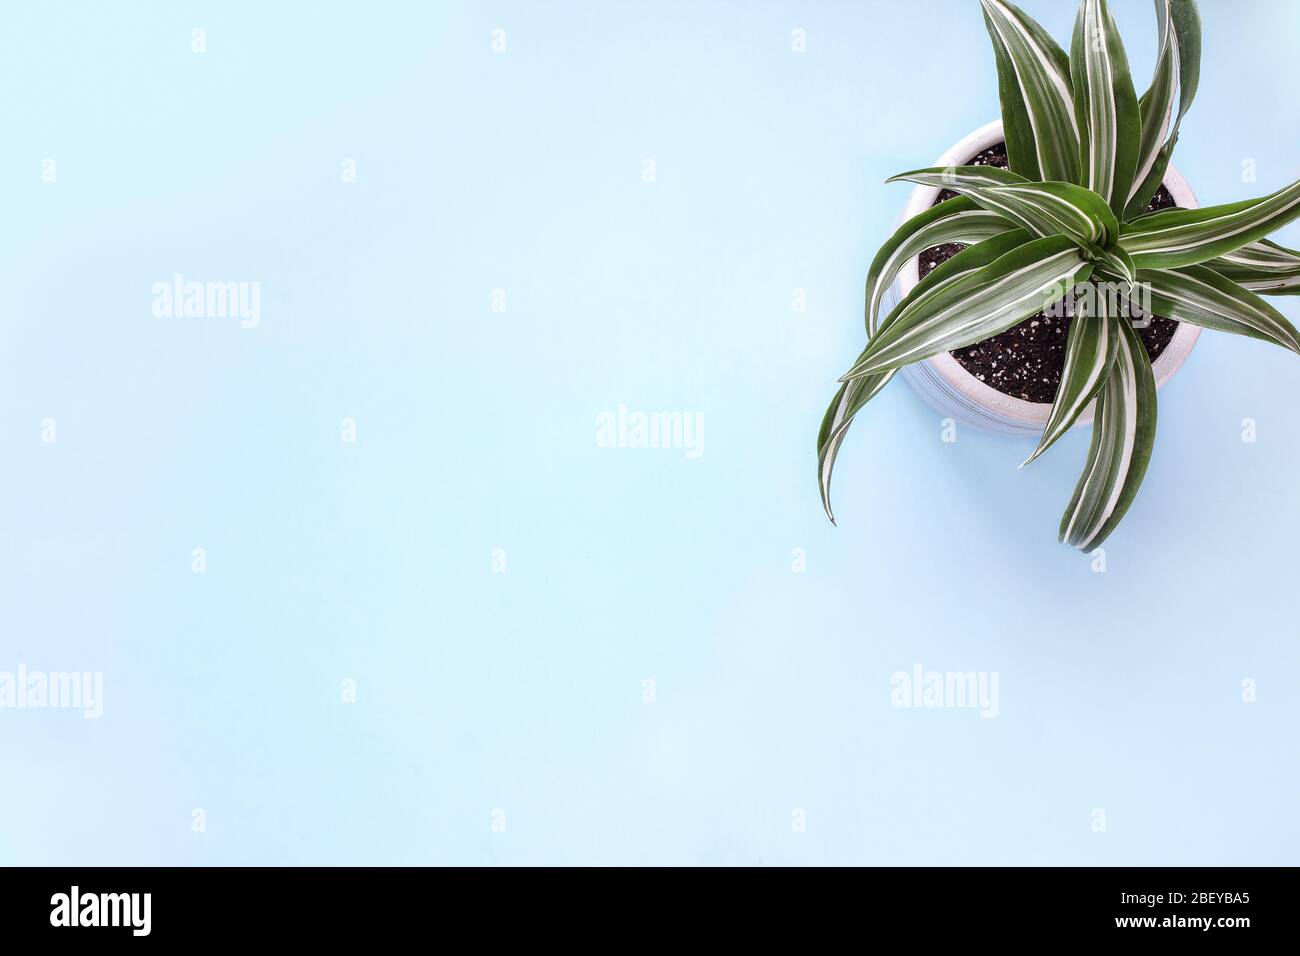 Top view of a White Jewel, Dracaena Deremensis, houseplant over a blue background with free space for text. Stock Photo